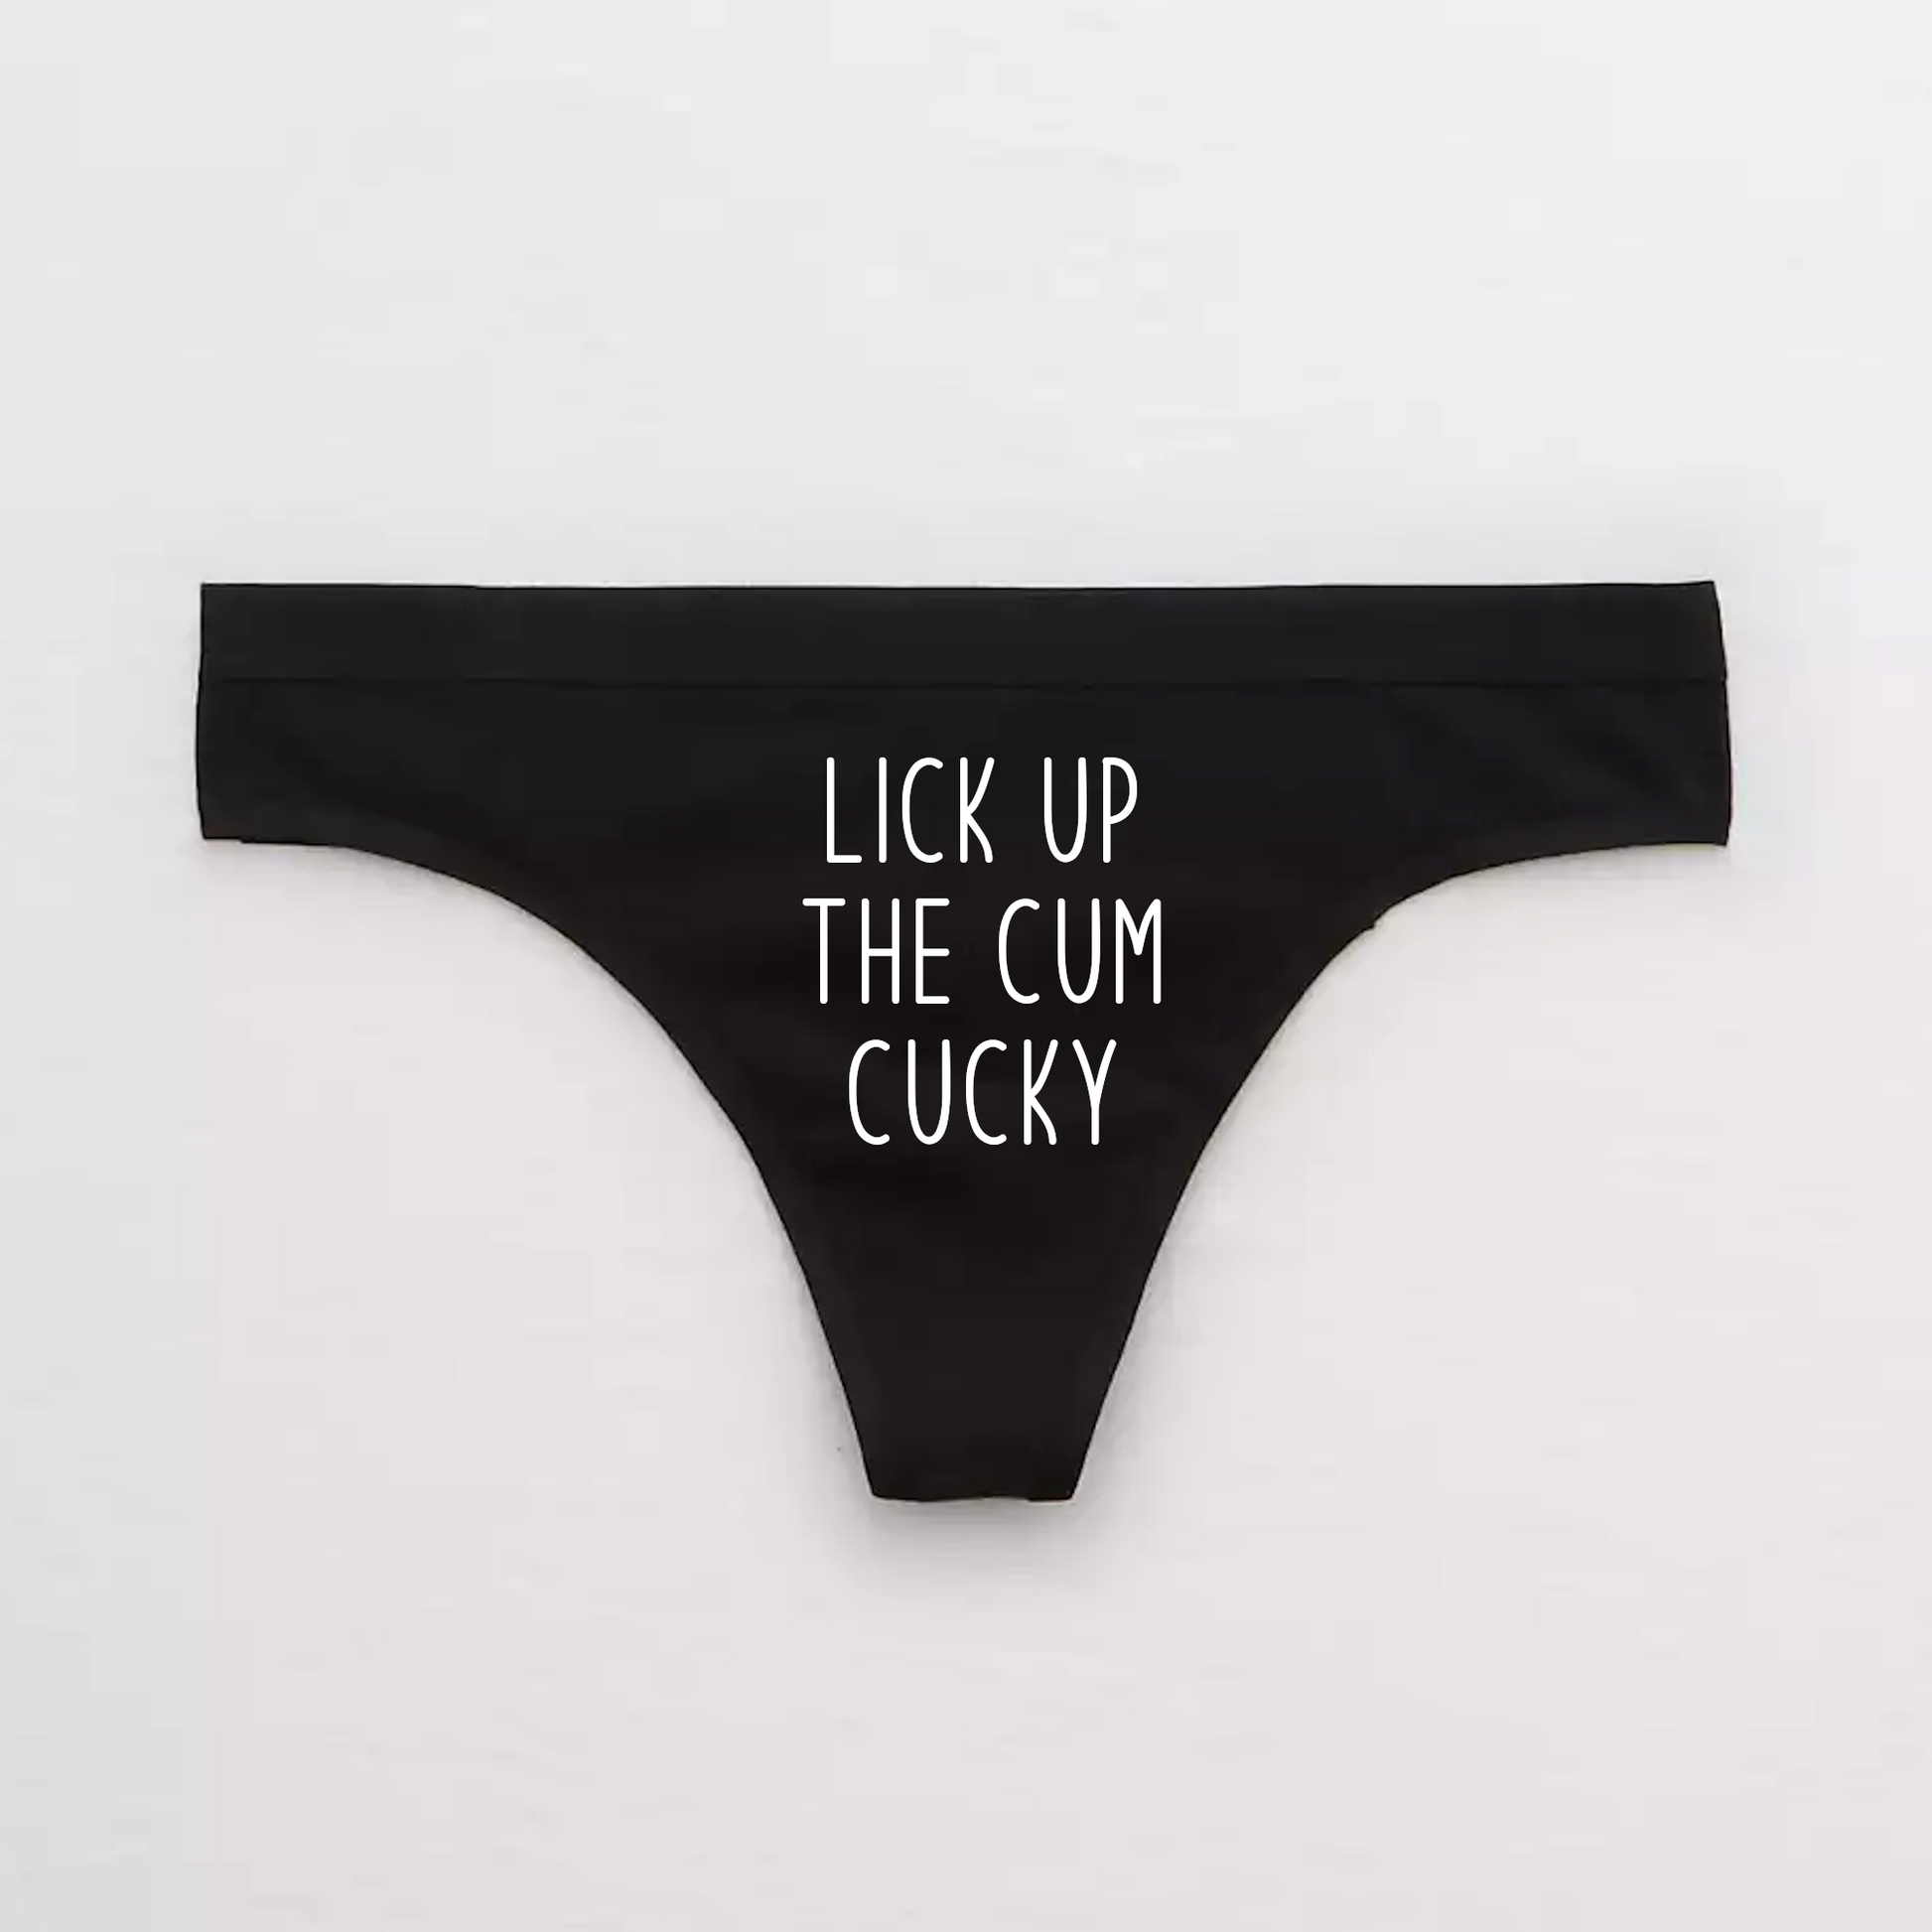 bill low recommends lick up my cum pic